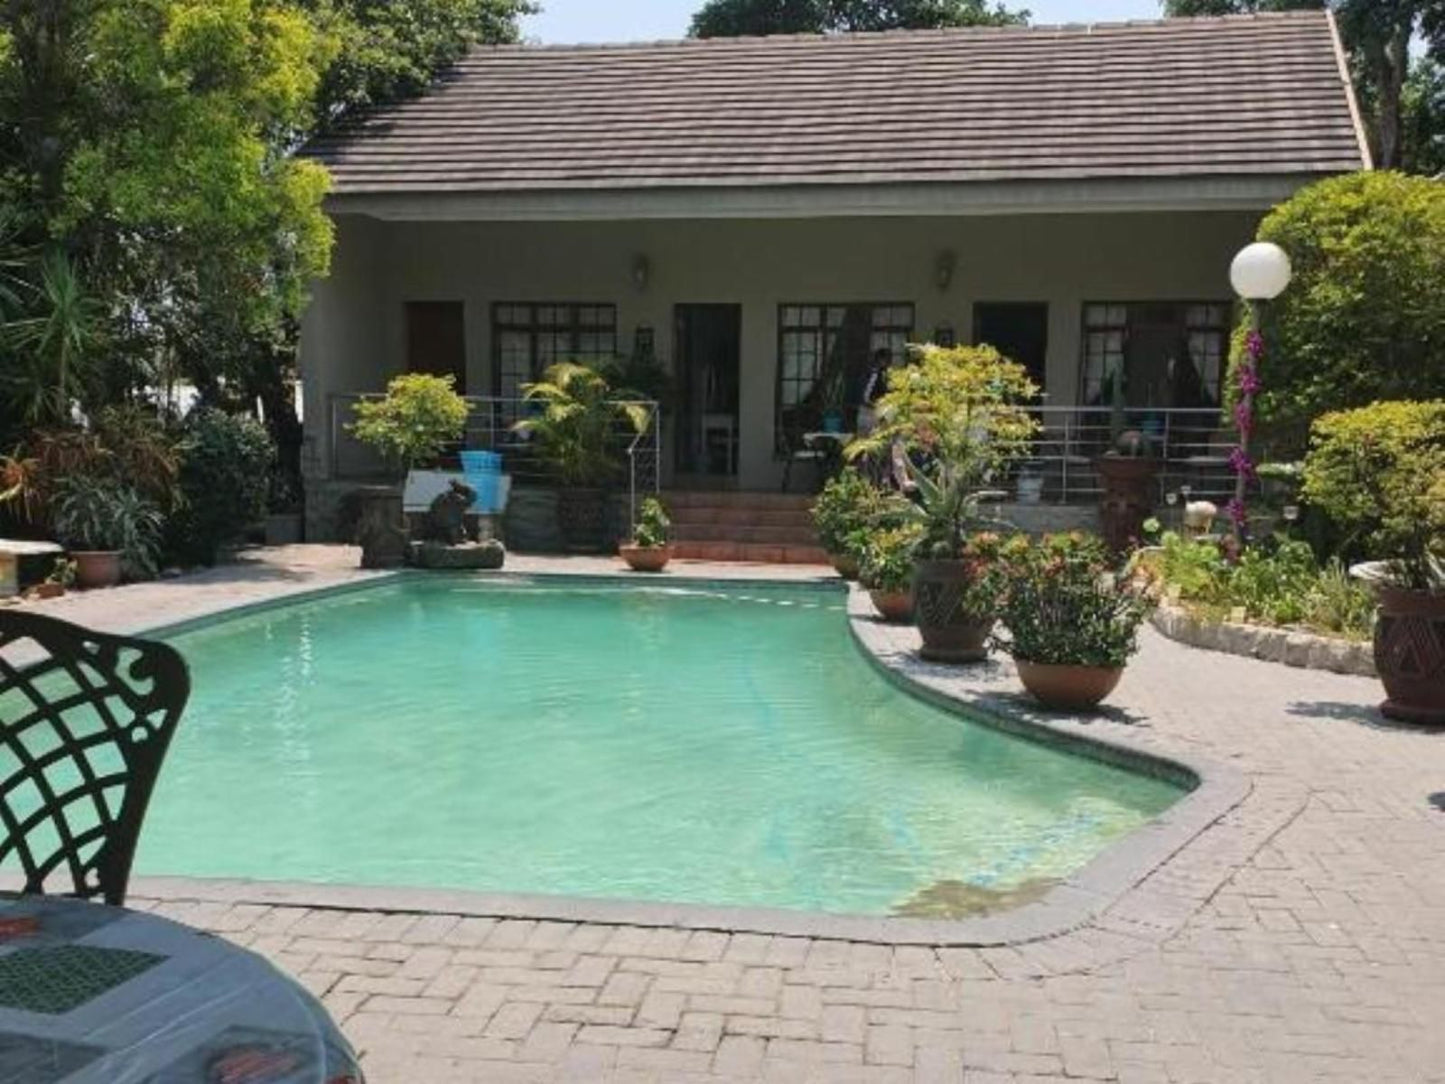 Harmony Guesthouse Nelspruit Mpumalanga South Africa House, Building, Architecture, Garden, Nature, Plant, Swimming Pool